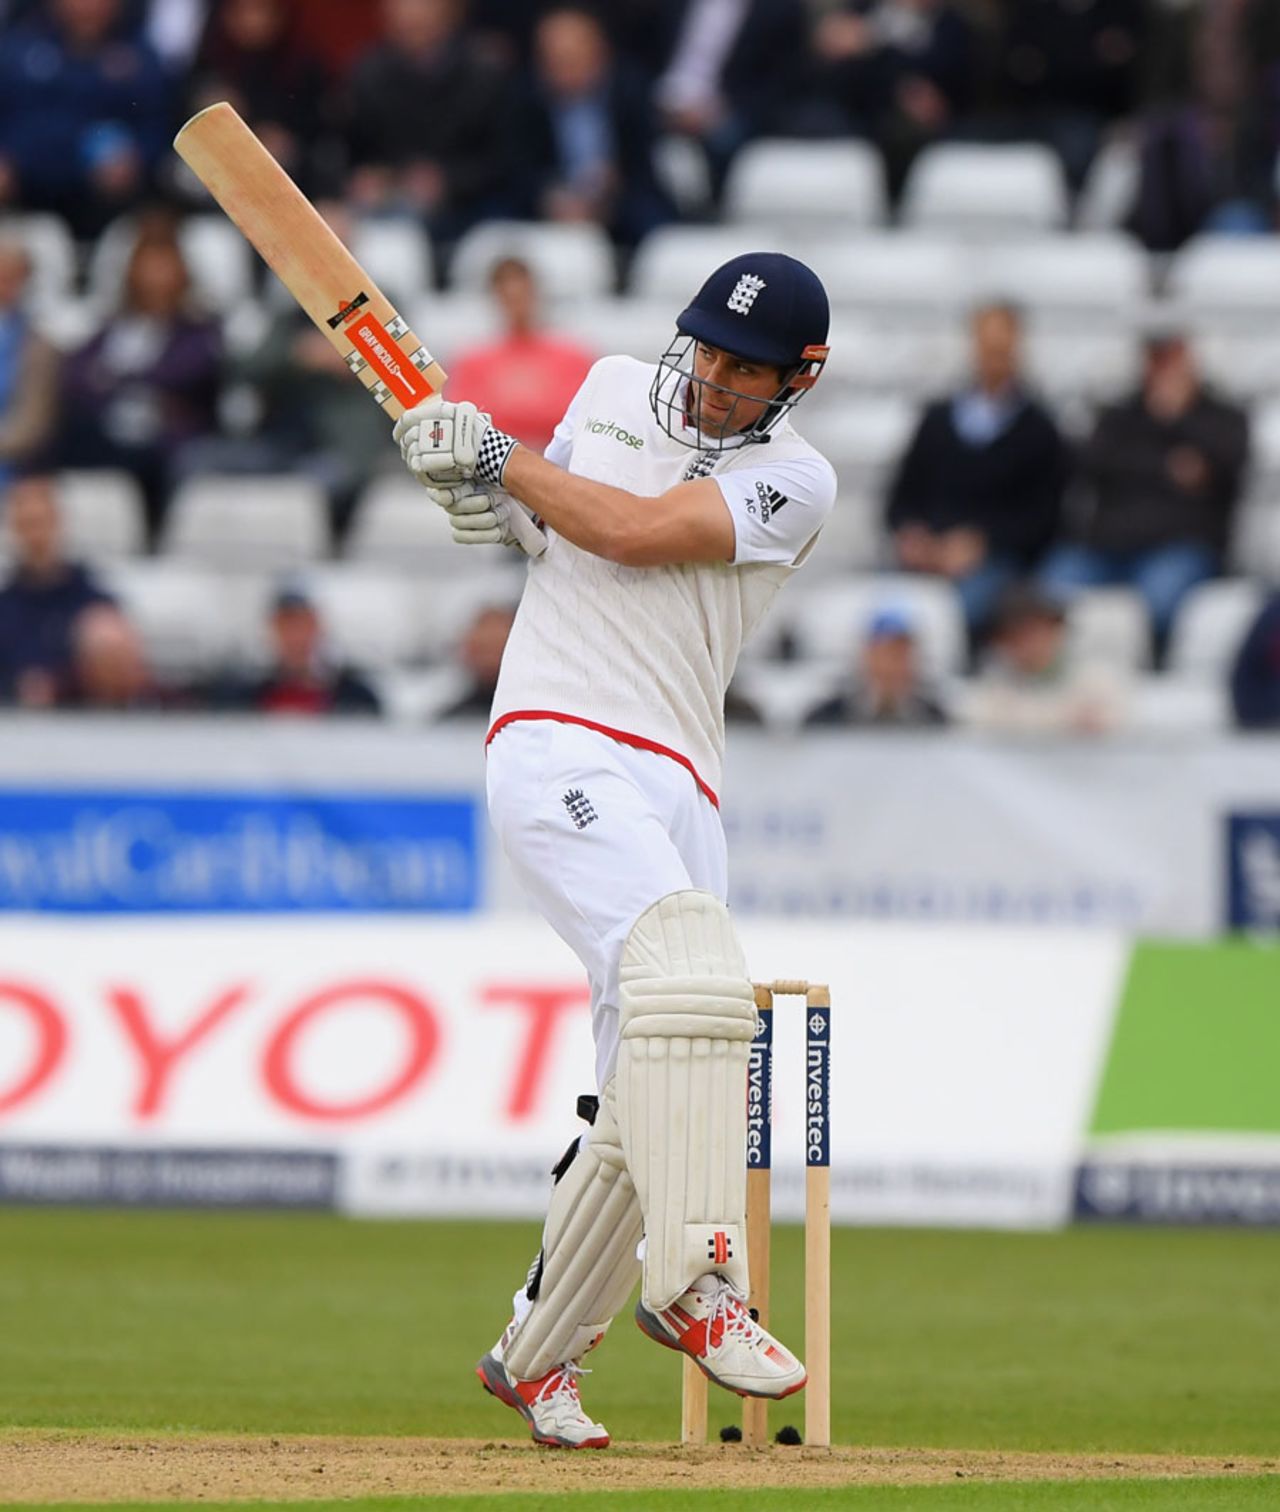 Alastair Cook pulls a delivery, England v Sri Lanka, 2nd Test, Chester-le-Street, 1st day, May 27, 2016